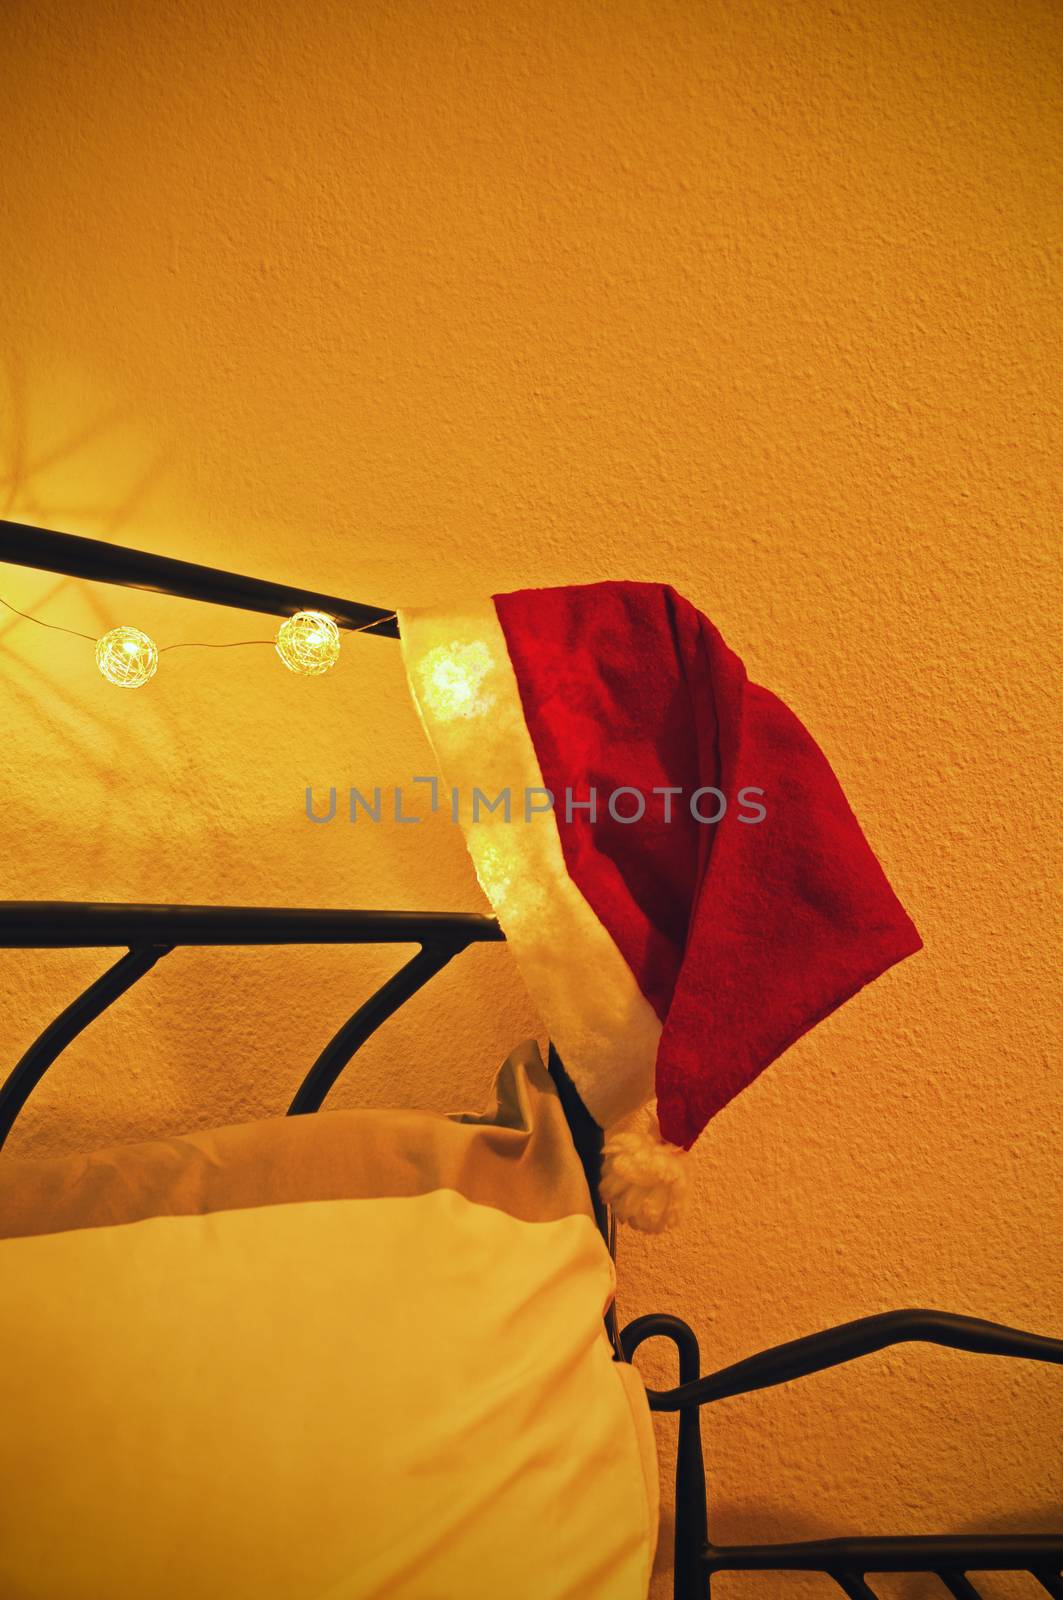 Christmas eve concept. Santa’s hat placed at the edge of a wrought iron bed frame, decorated with garland of Christmas lights. Coziness, comfort, interior and holidays concept.